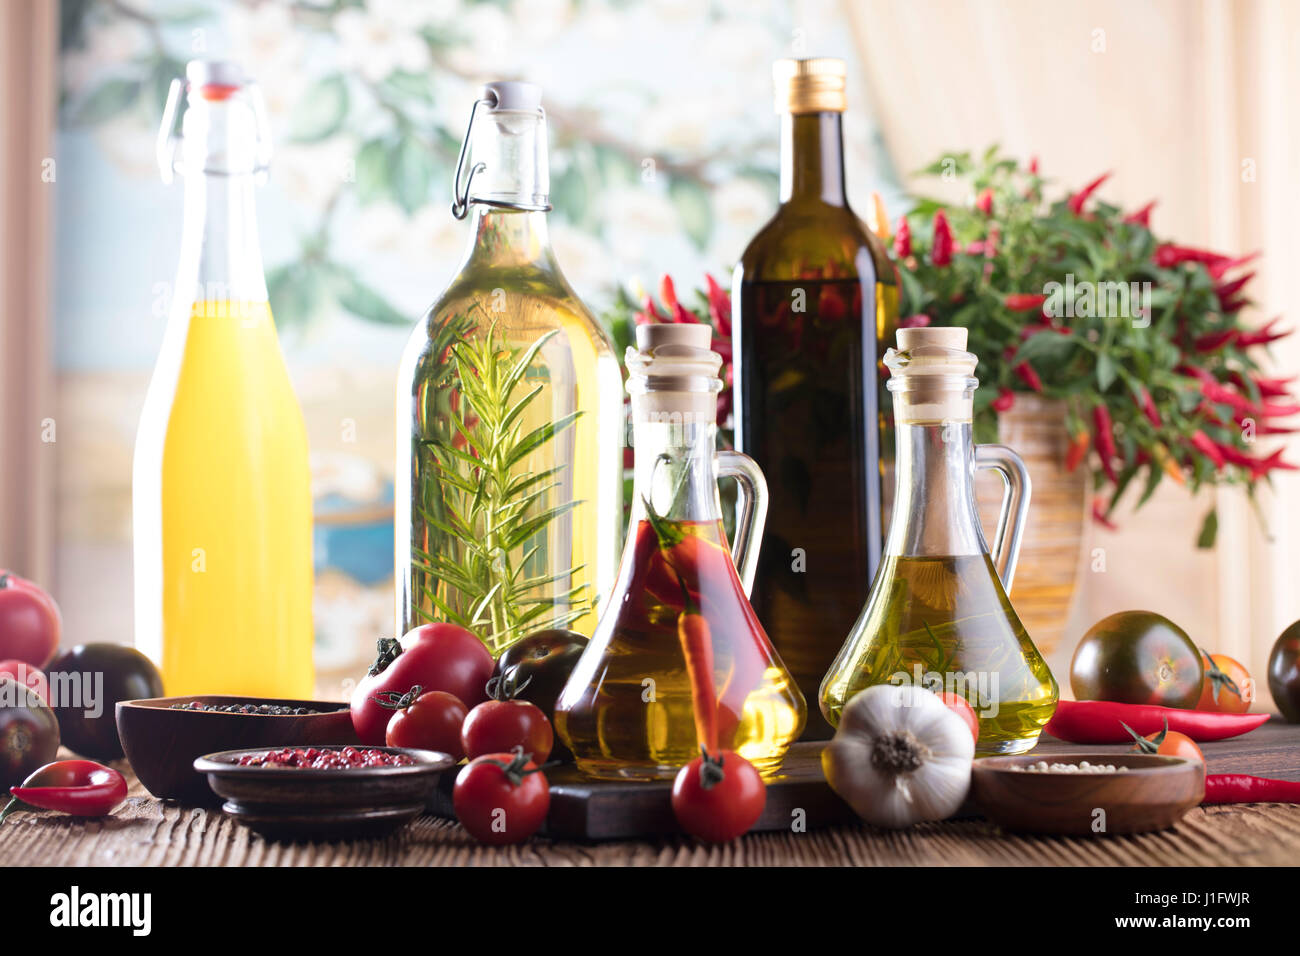 Italian food concept, rosemary olive oil, healthy food Stock Photo